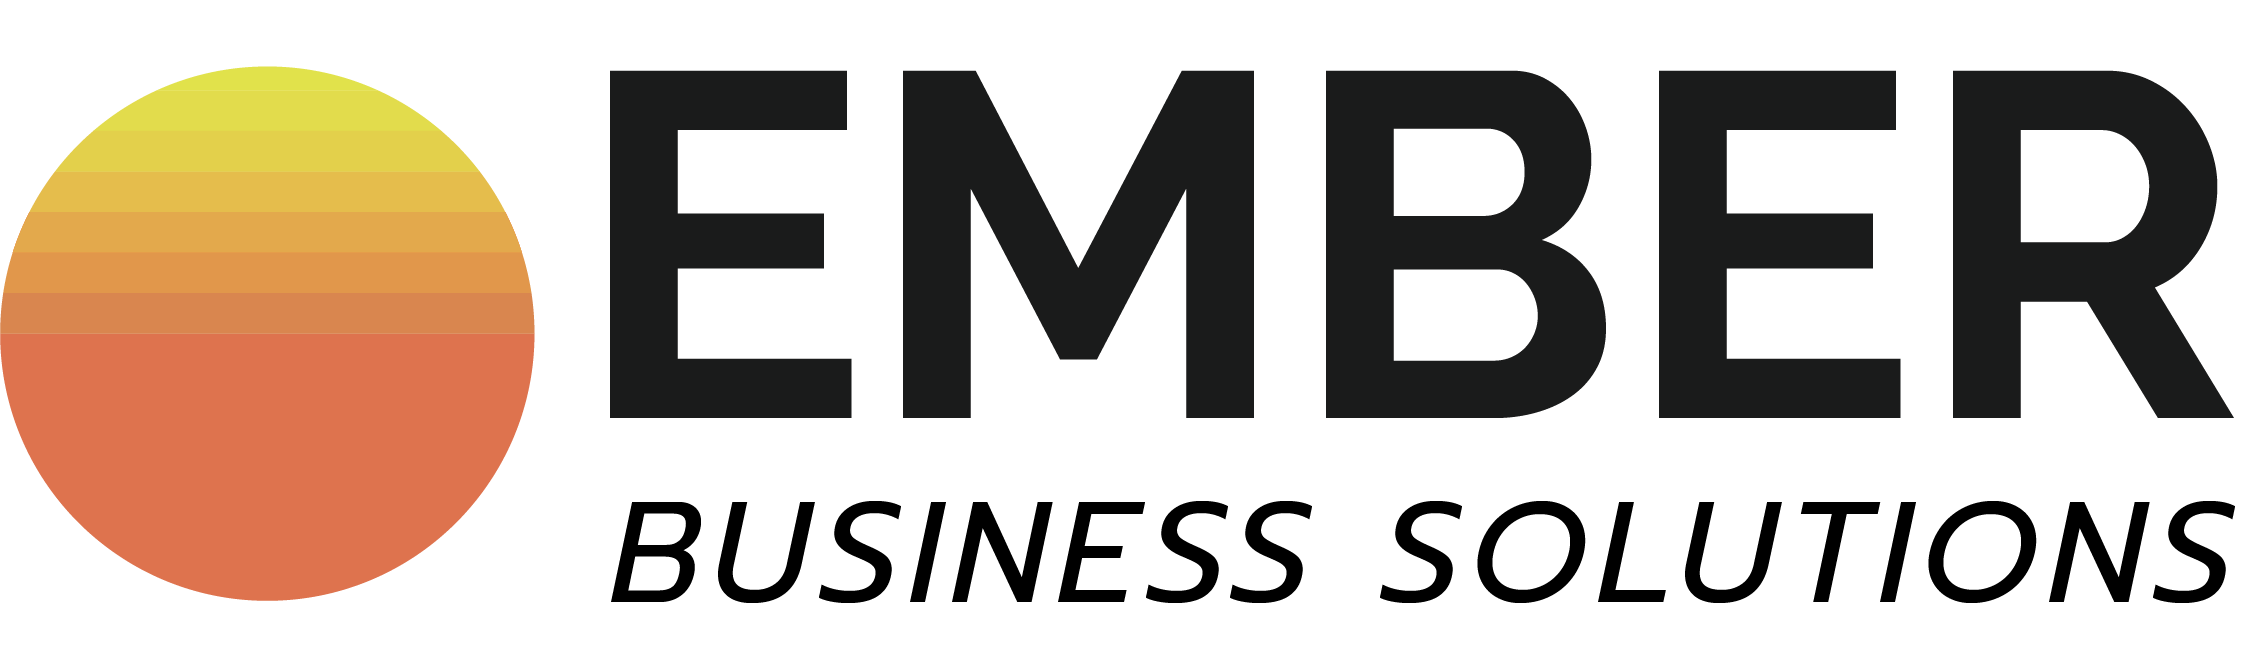 Ember Business Solutions 